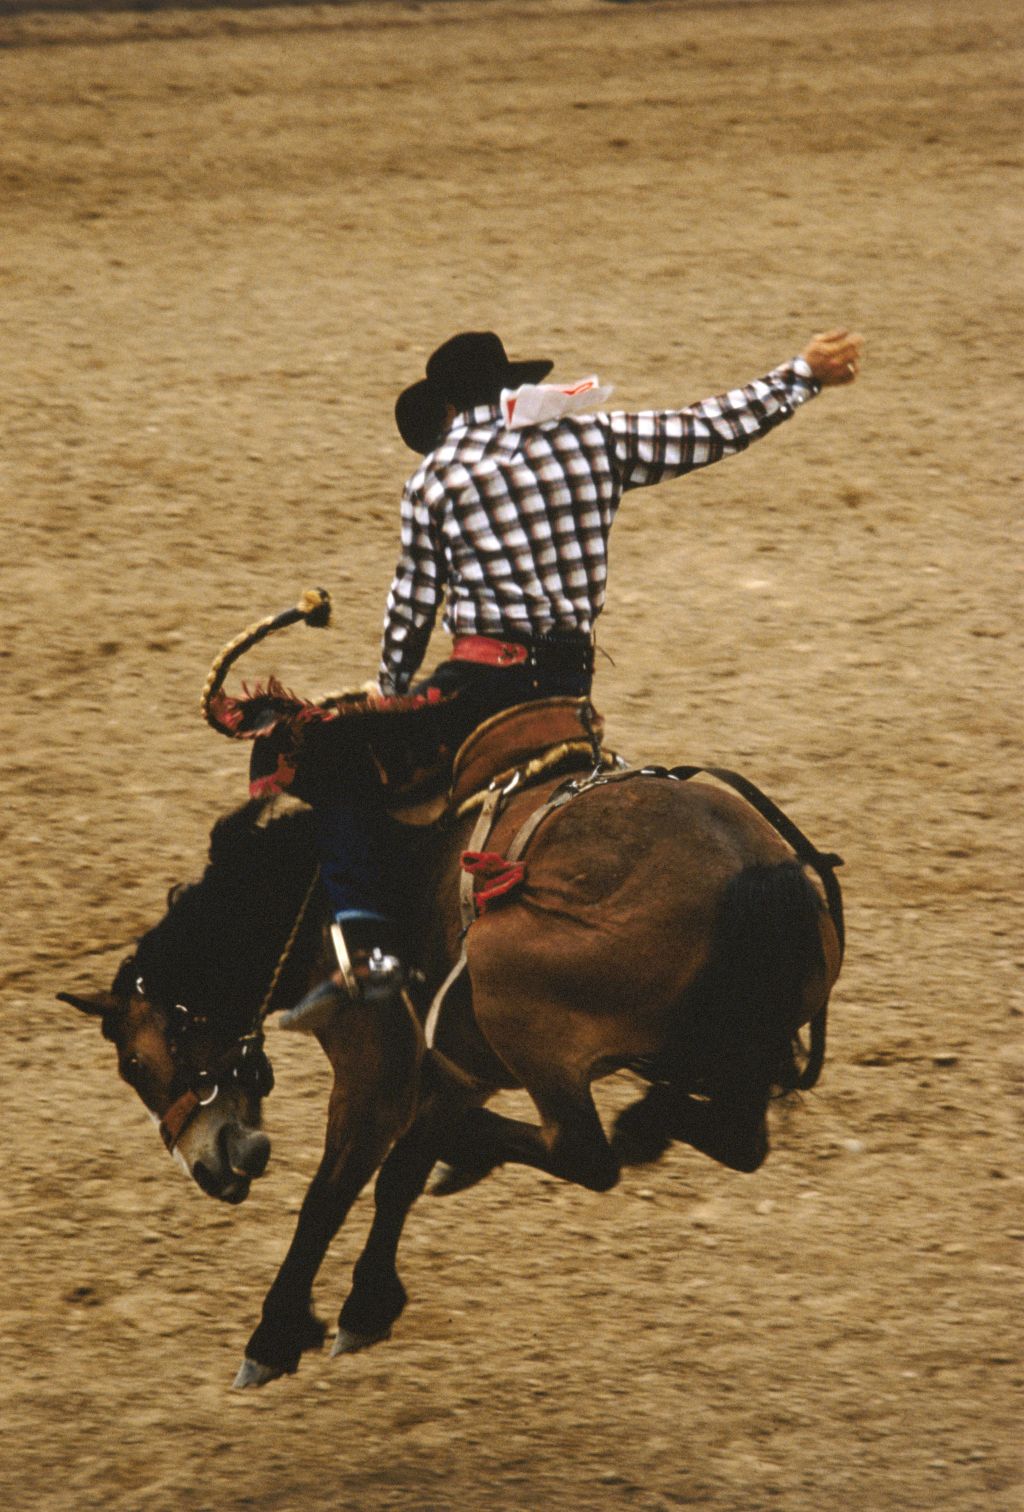 Bucking bronco rider in action at rodeo, side view